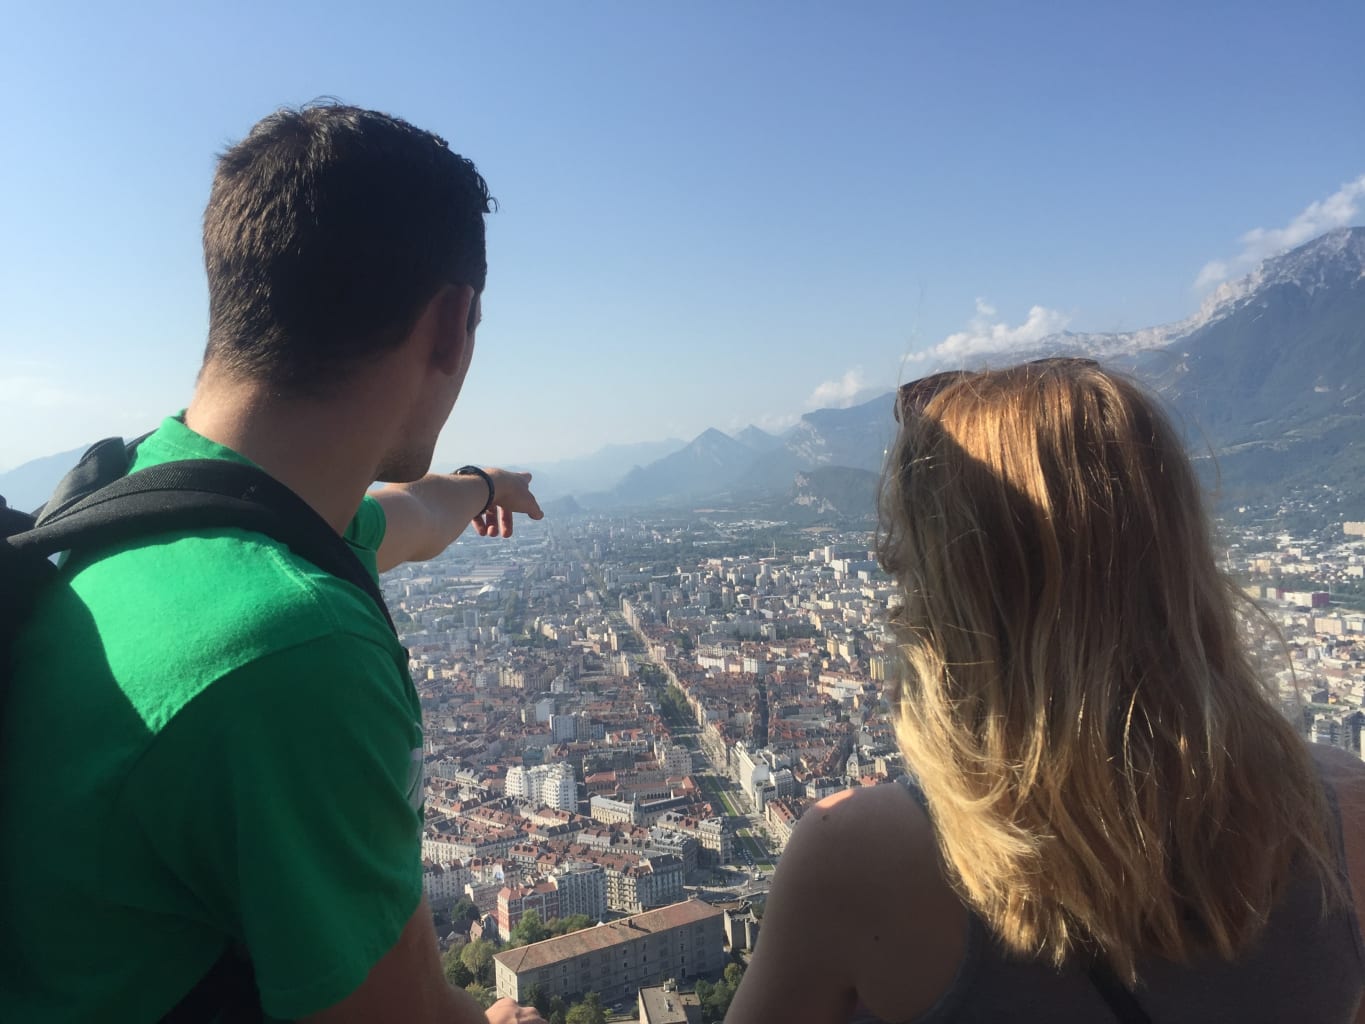 Two students on top of a mountain overlooking Grenoble, France.